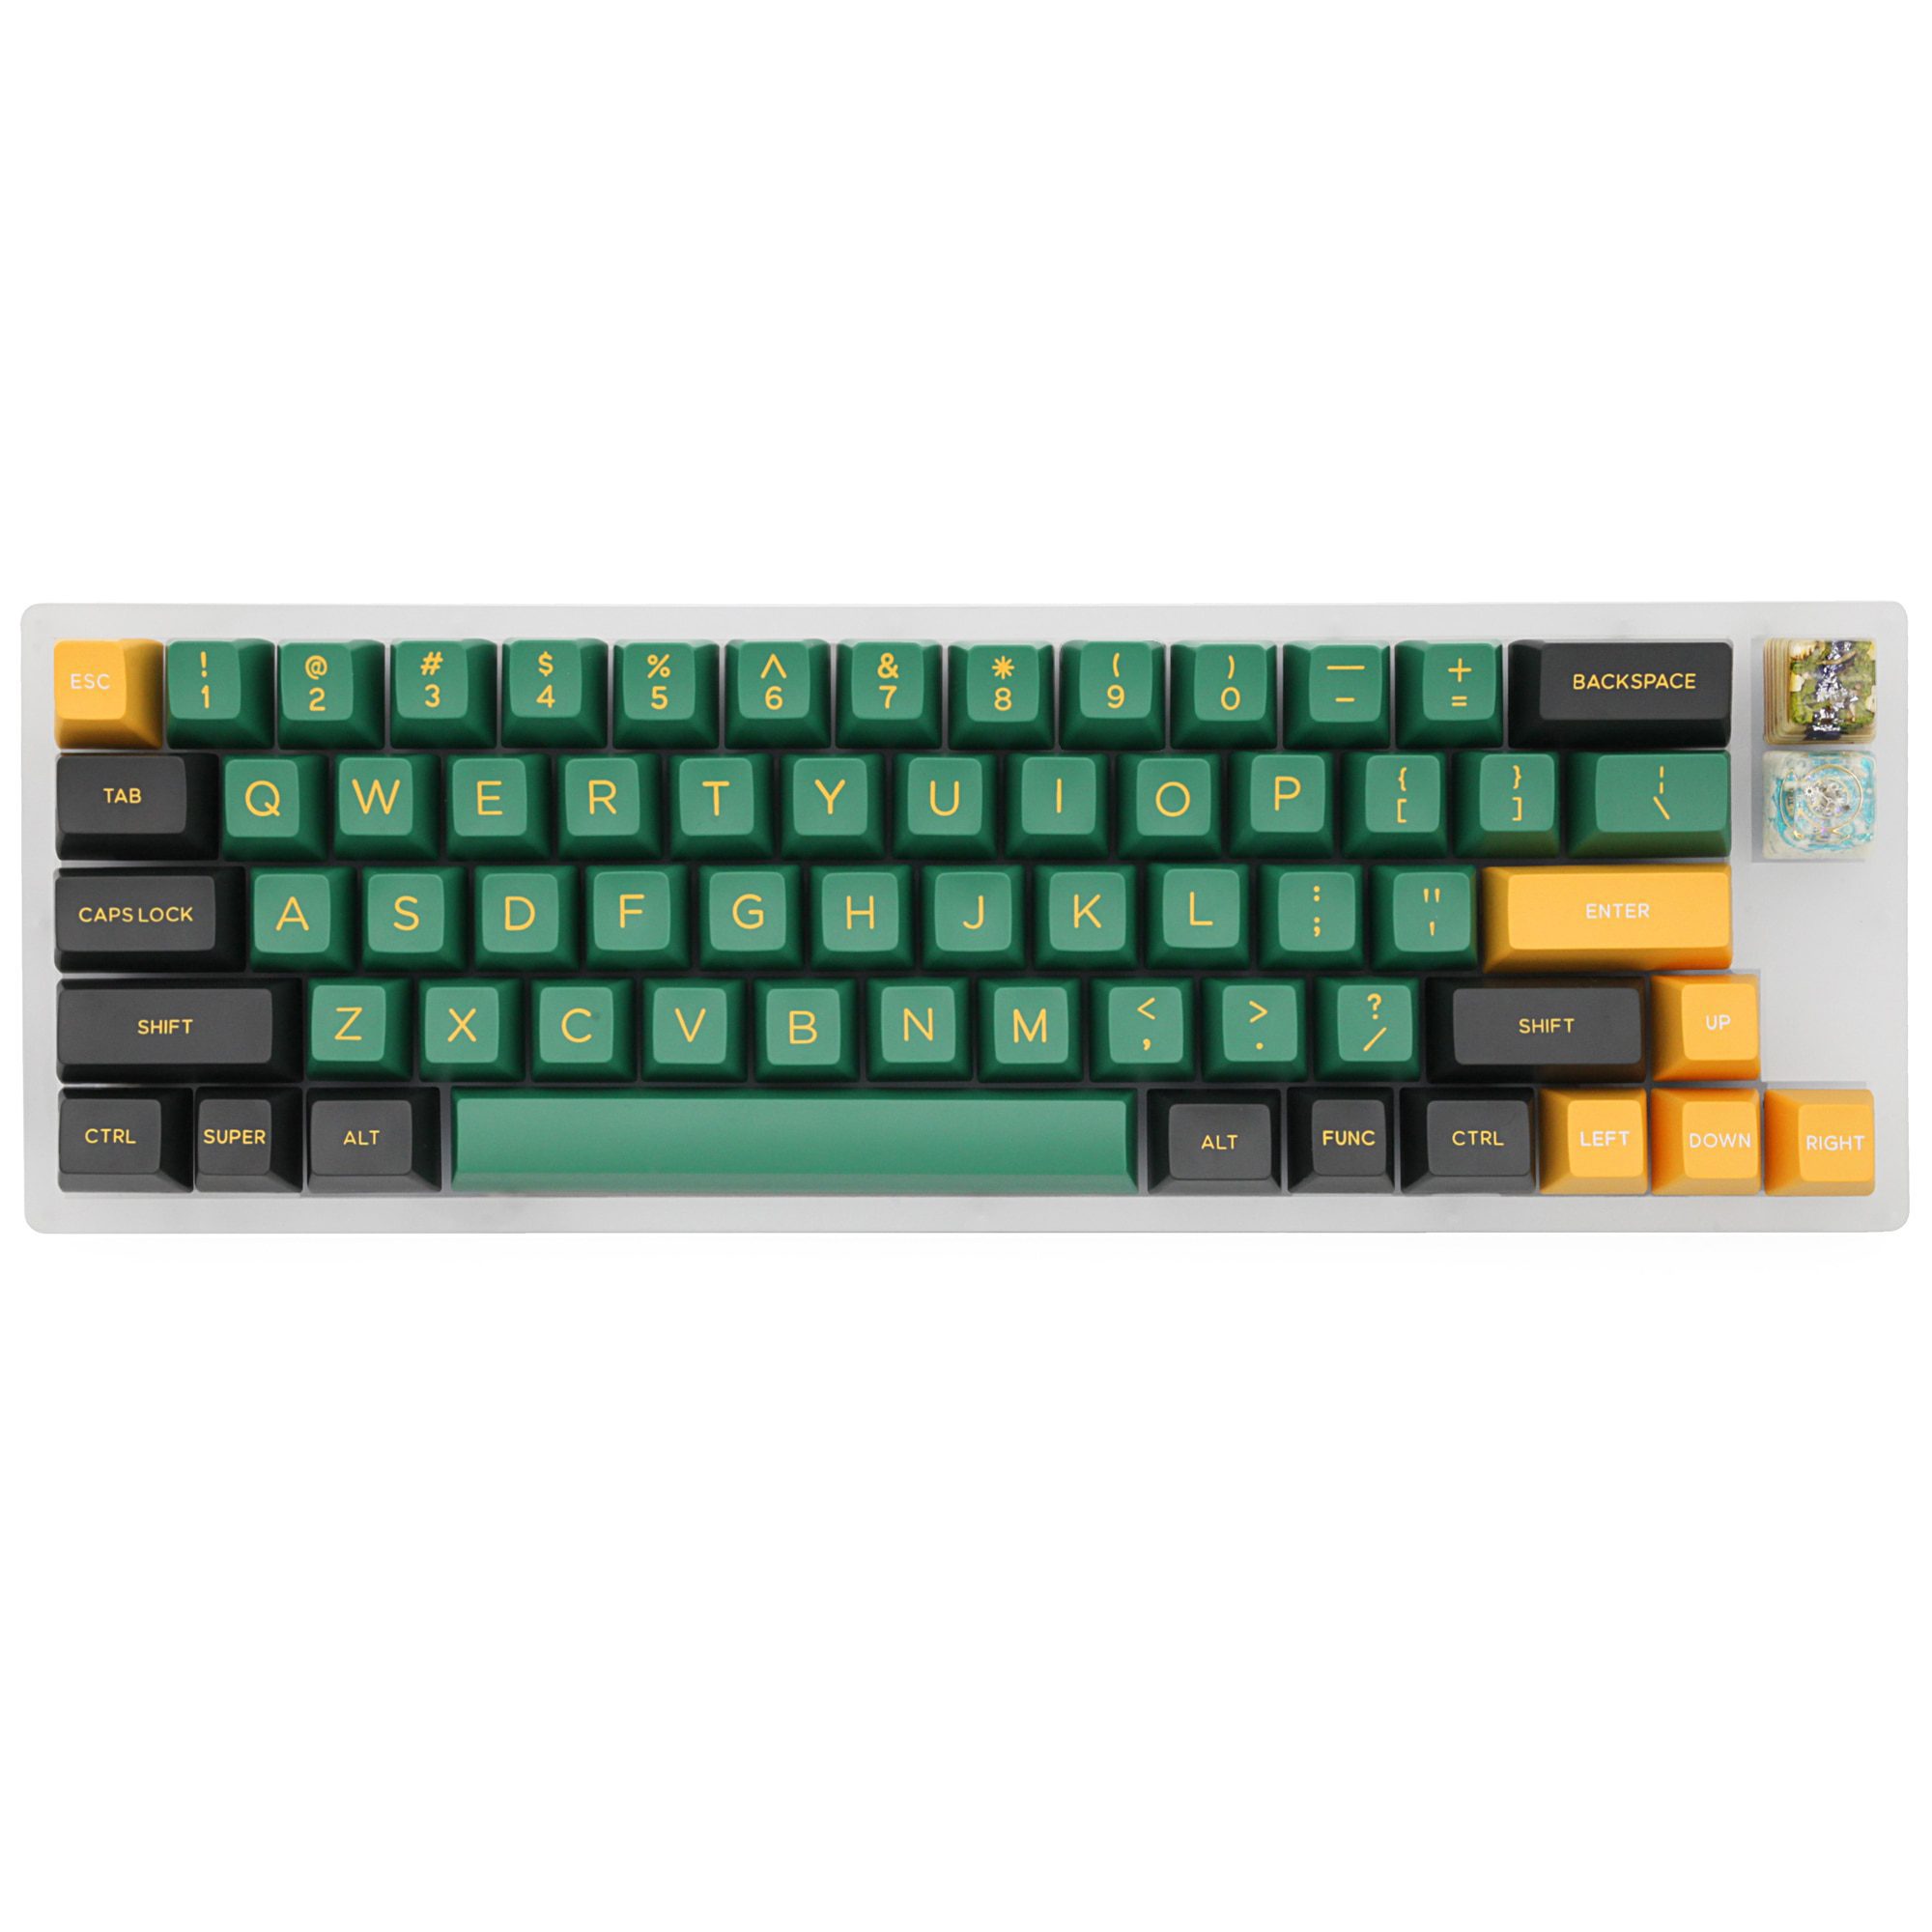 Womier 87 key K87 Mechanical Keyboard kit 80% 87 TKL PCB CASE hot swappable switch support lighting effects with RGB switch led